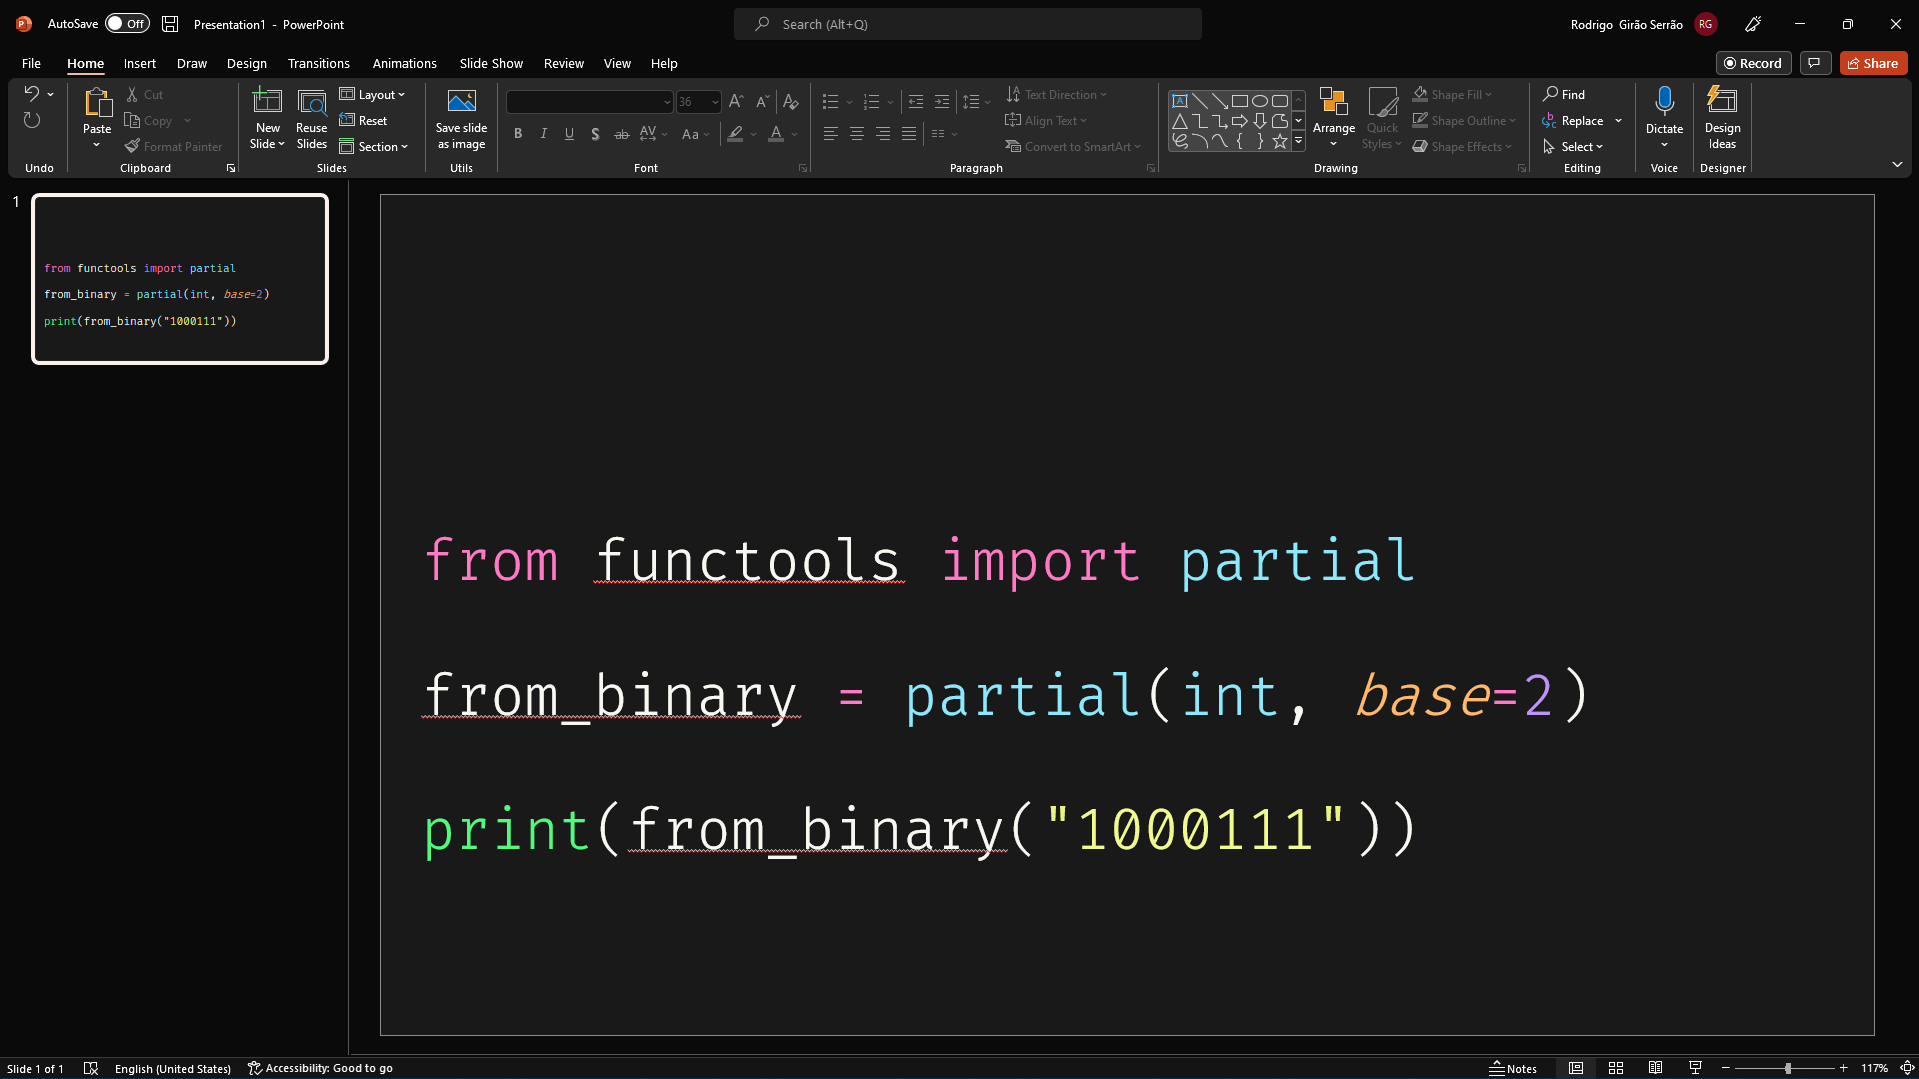 Code with syntax highlighting in Microsoft PowerPoint.